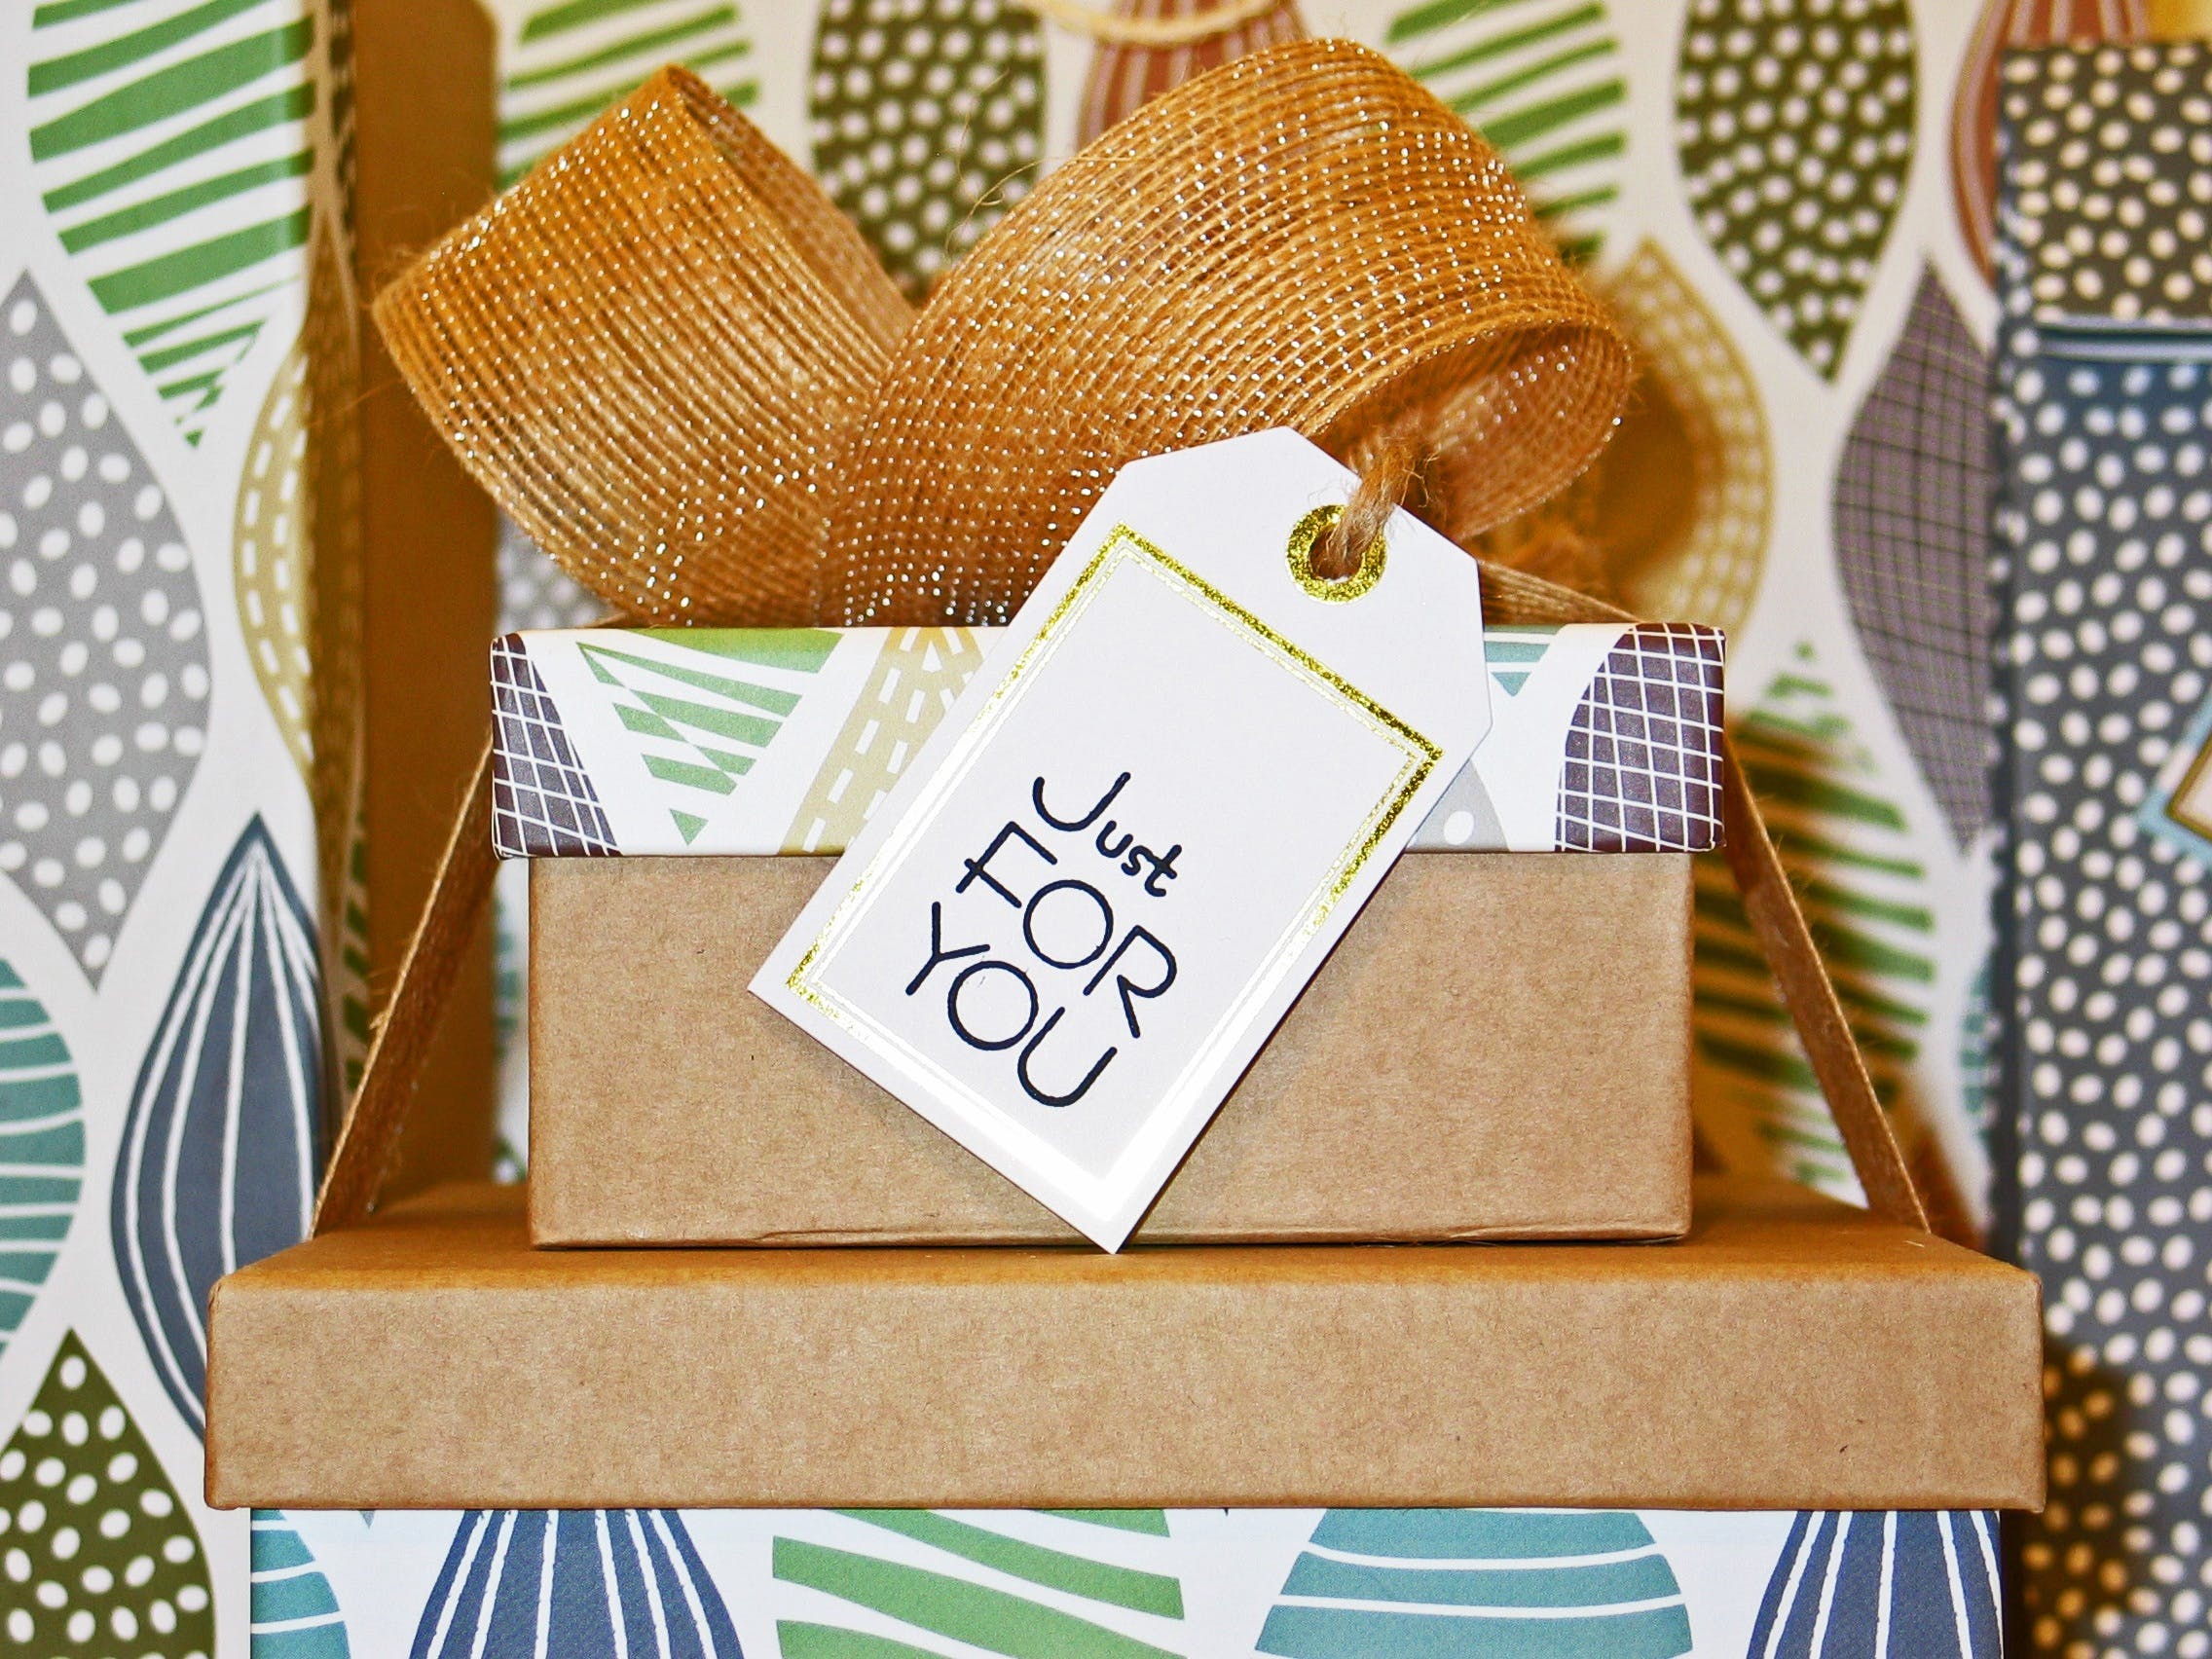 close-up photo of gift boxes with greeting card